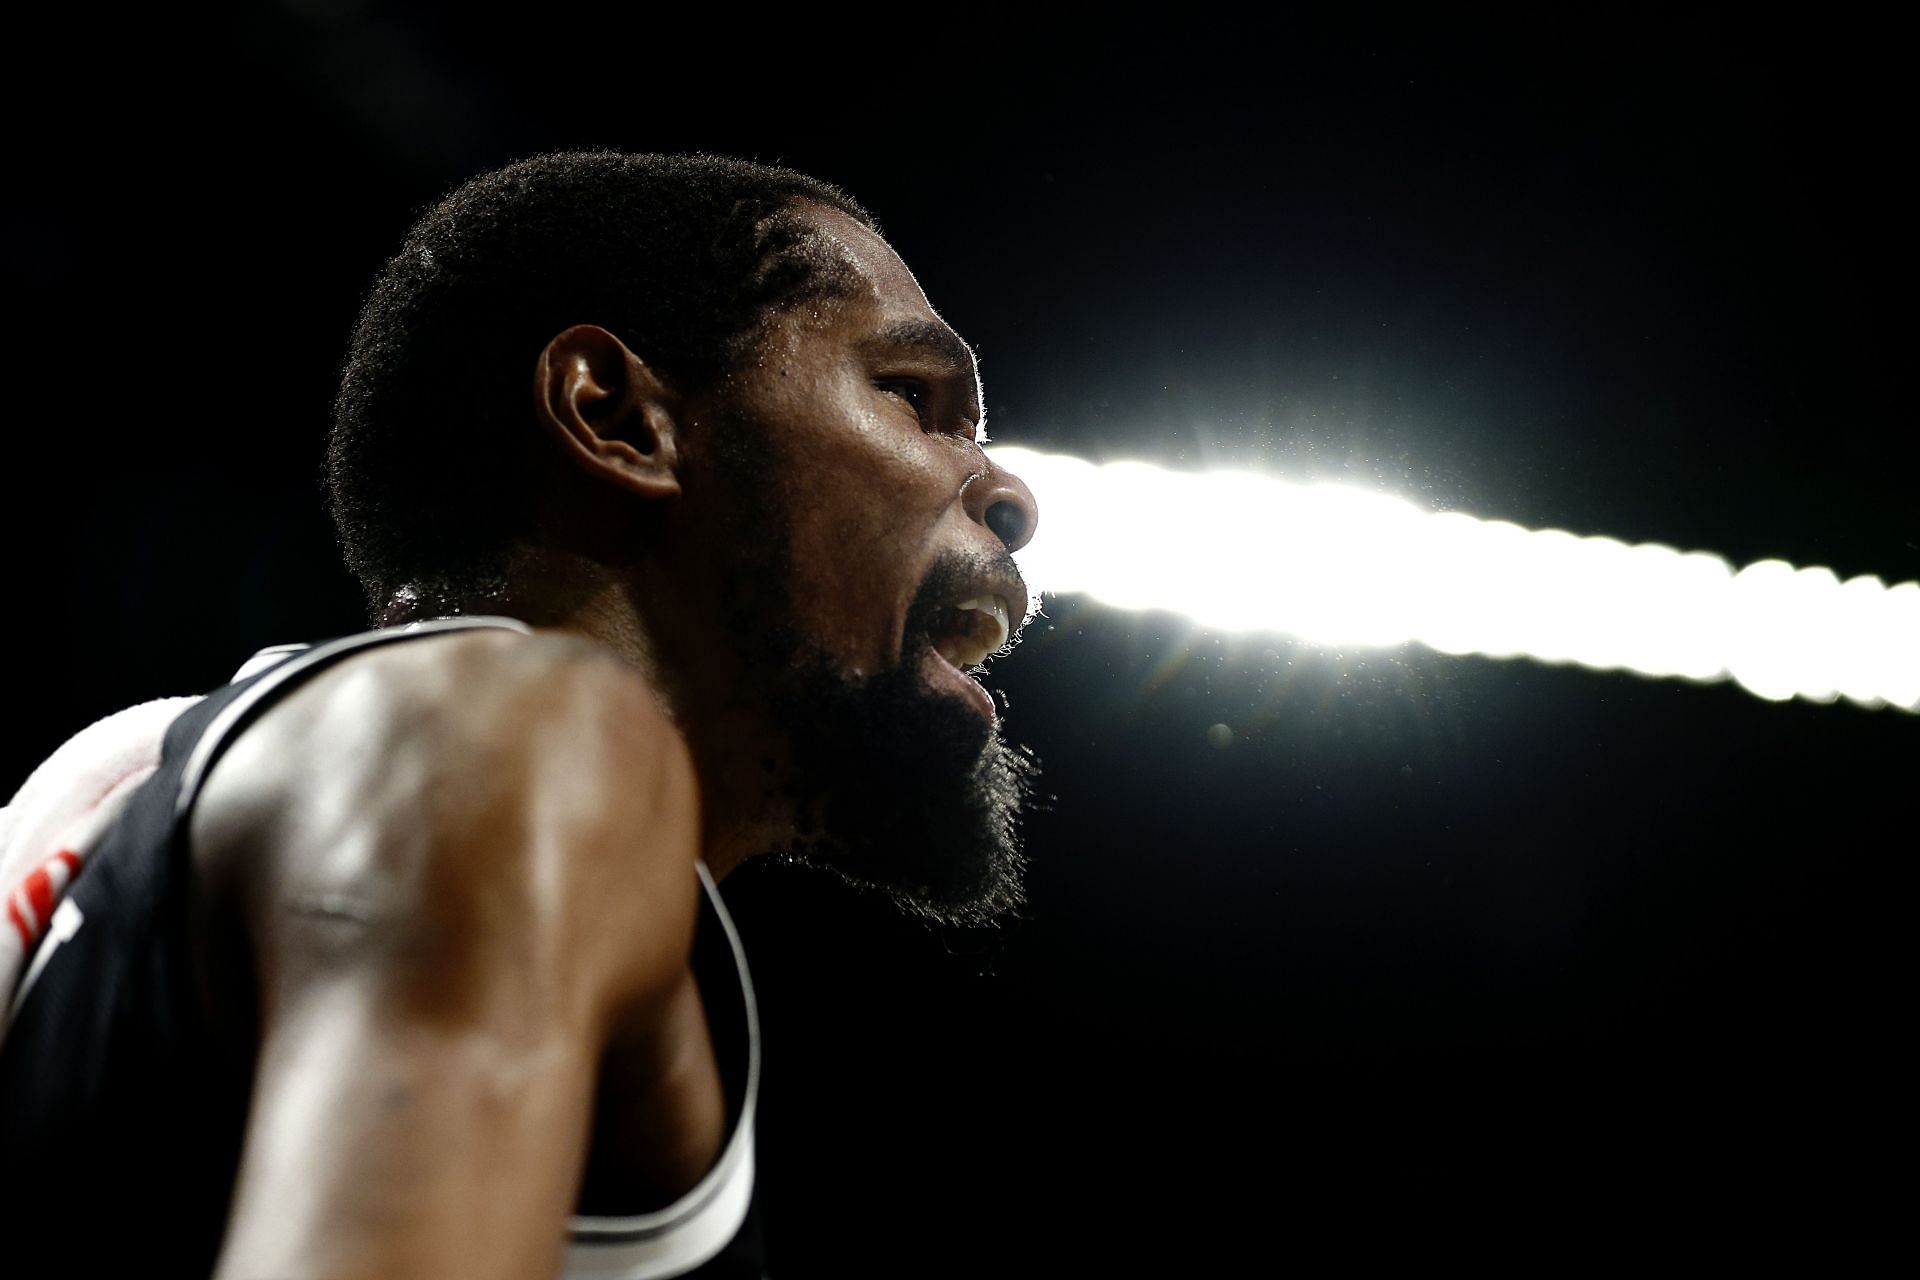 Brooklyn Nets superstar Kevin Durant responded to Skip Bayless on Twitter for taunting LeBron James on Tuesday